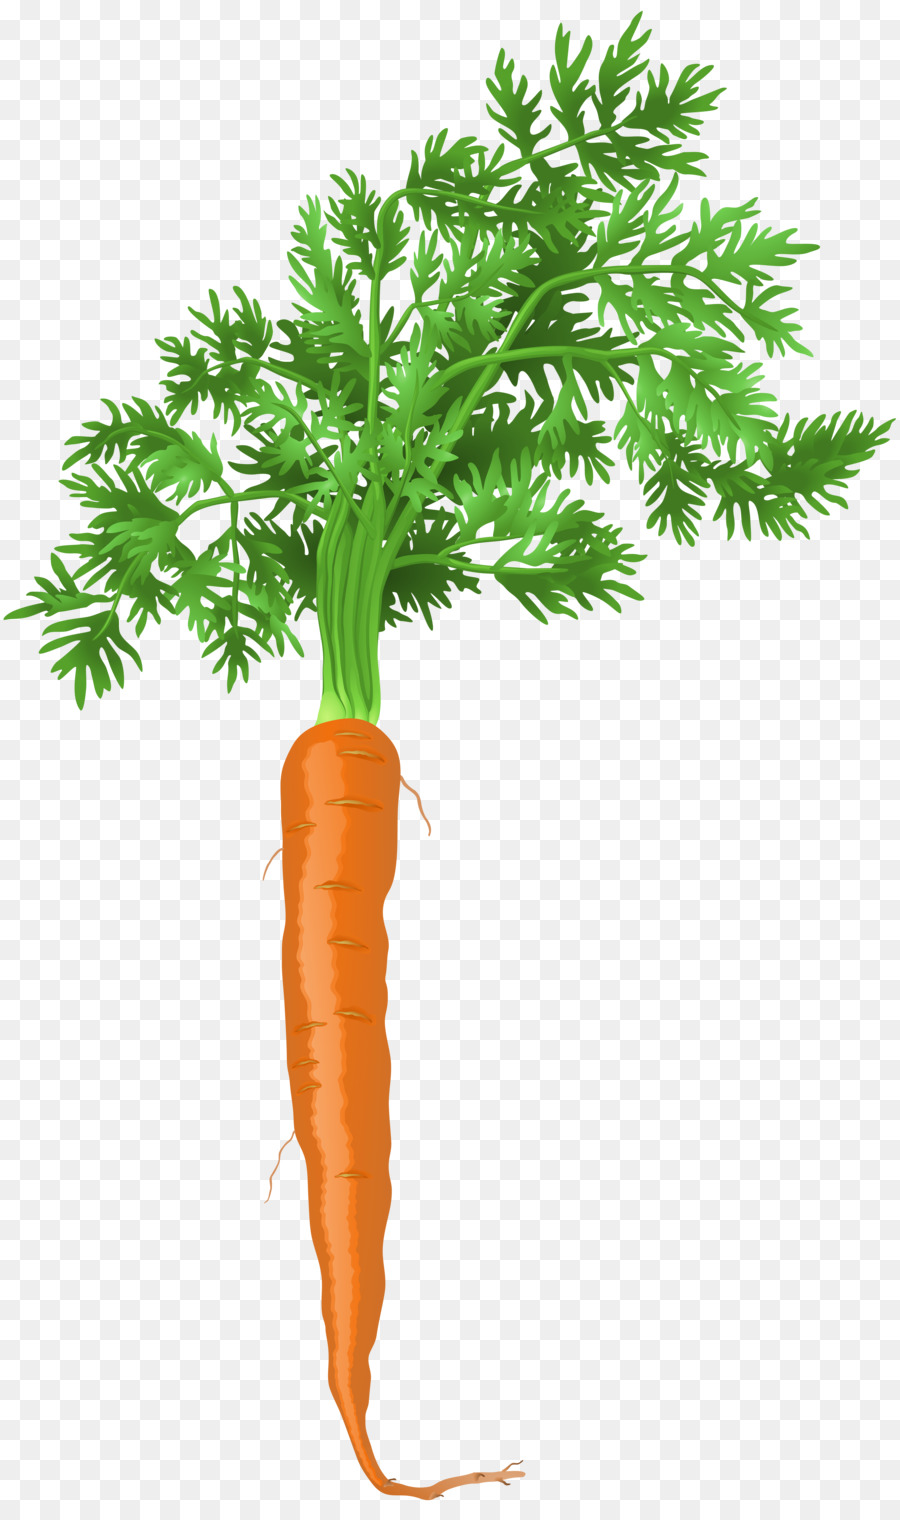 Carrot Coleslaw - drawing carrot png download - 4770*8000 - Free Transparent Carrot png Download.